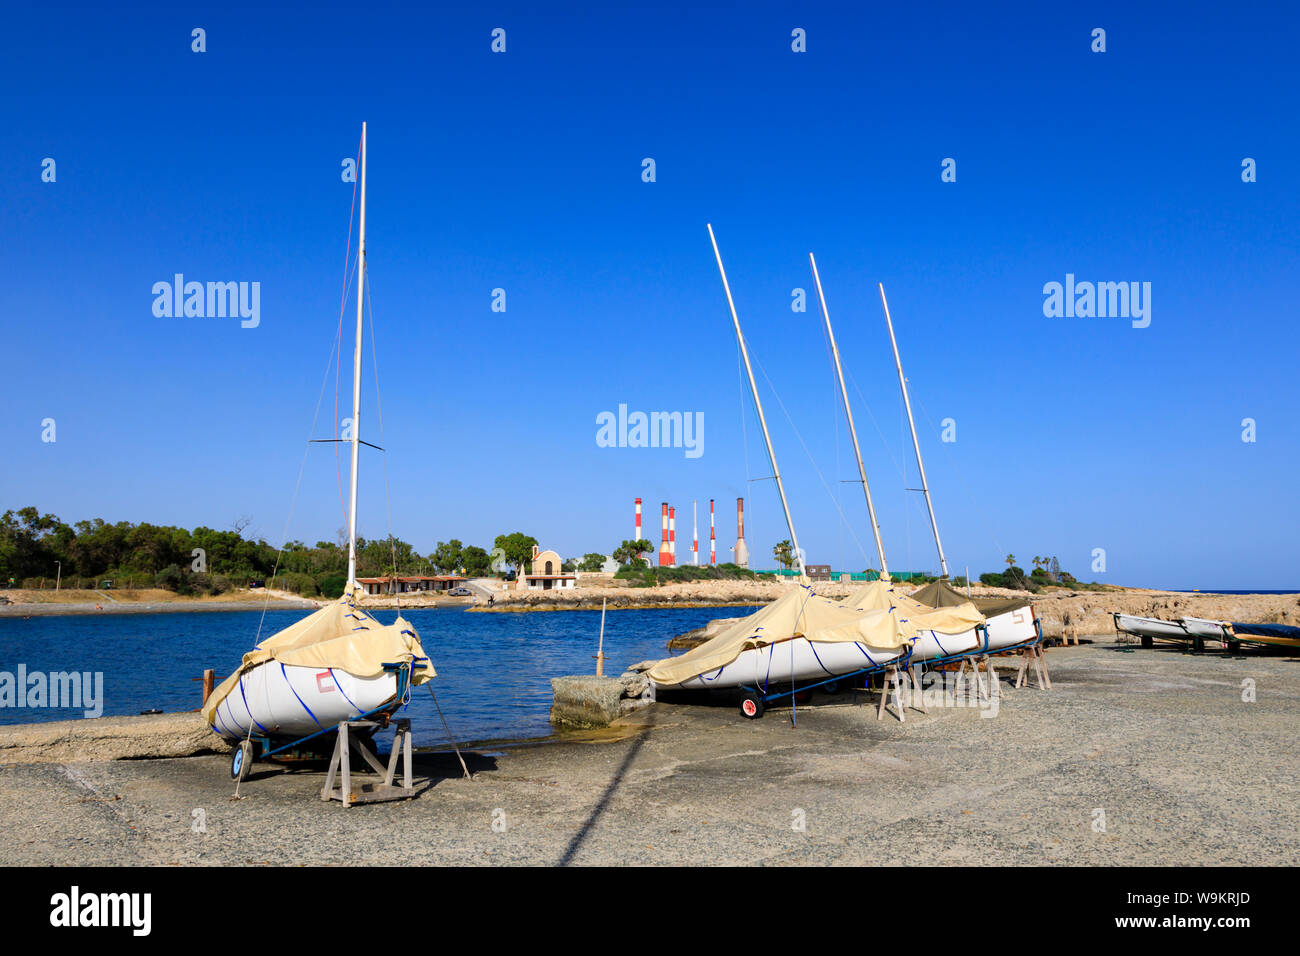 Yachts of the services water sports club based at Dhekelia Sovereign Base Area, Larnaca, Cyprus. Stock Photo